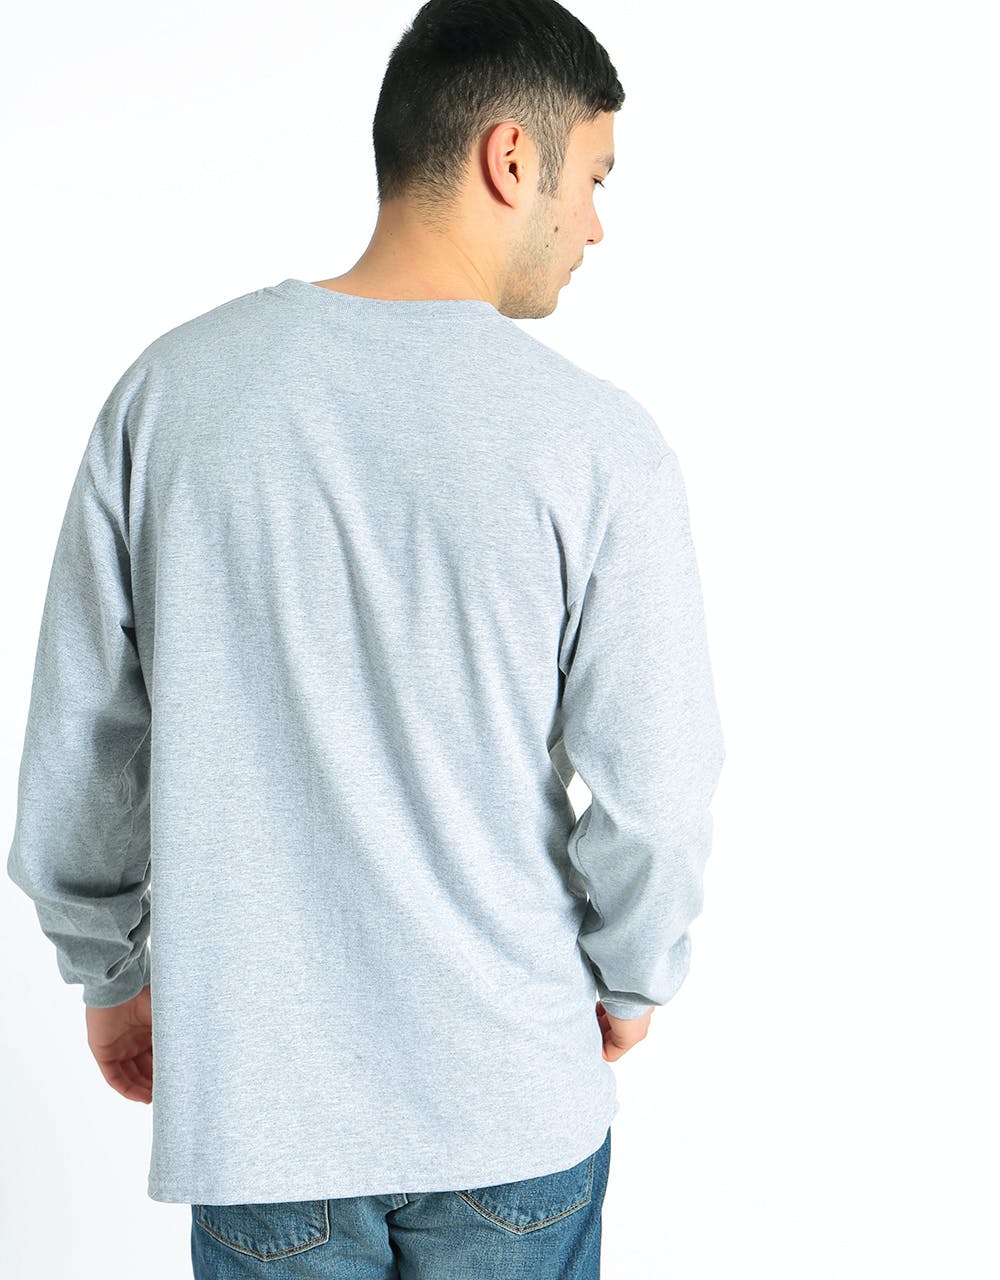 Route One Full English Long Sleeve T-Shirt - Heather Grey